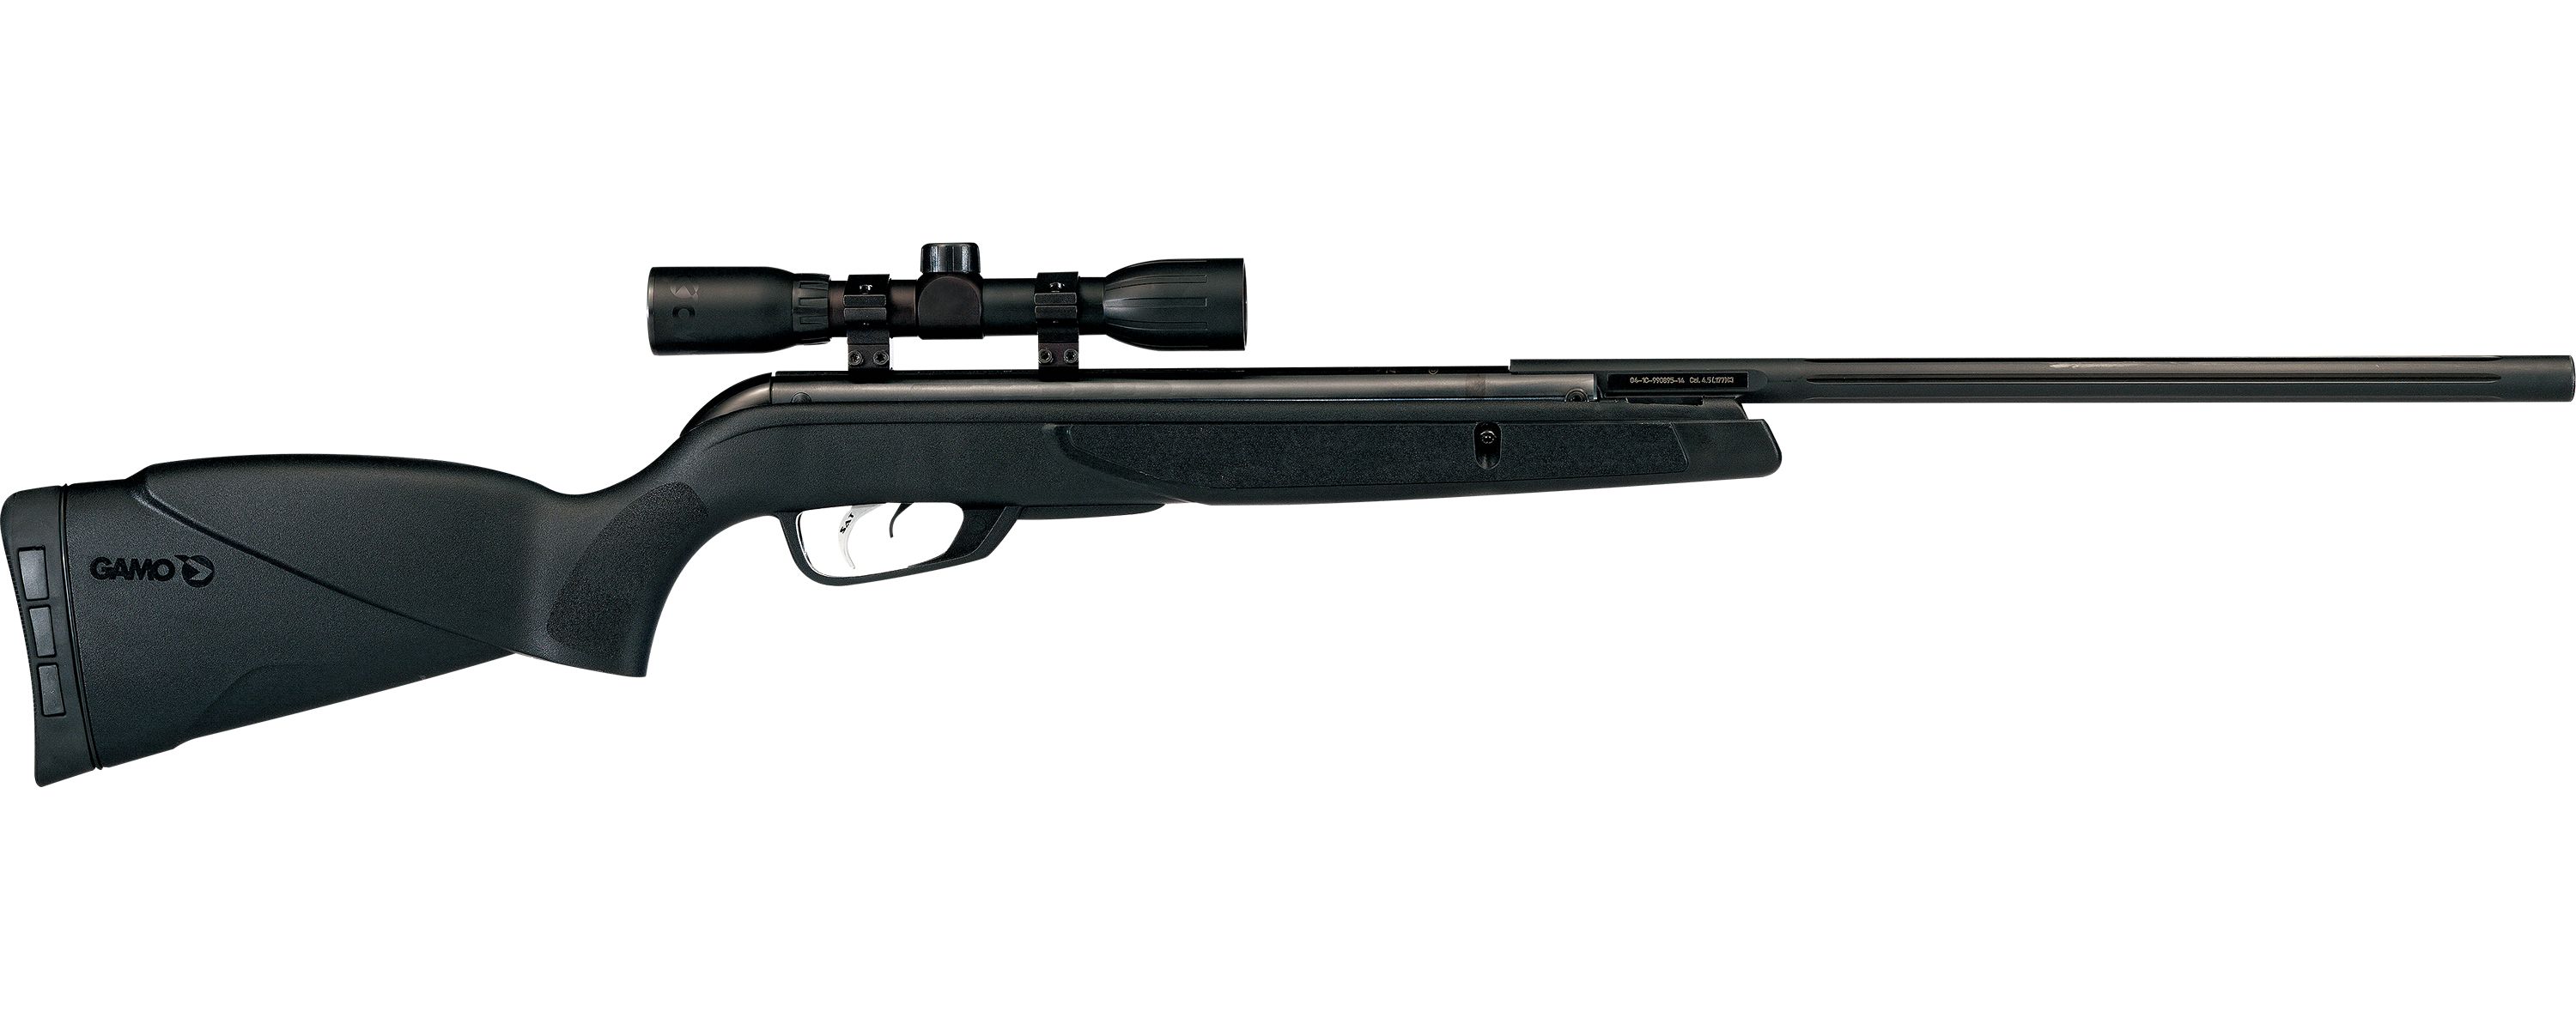 Gamo Big Cat Deluxe .177-Cal. Air Rifle - $99.88 (Free Shipping over $50)